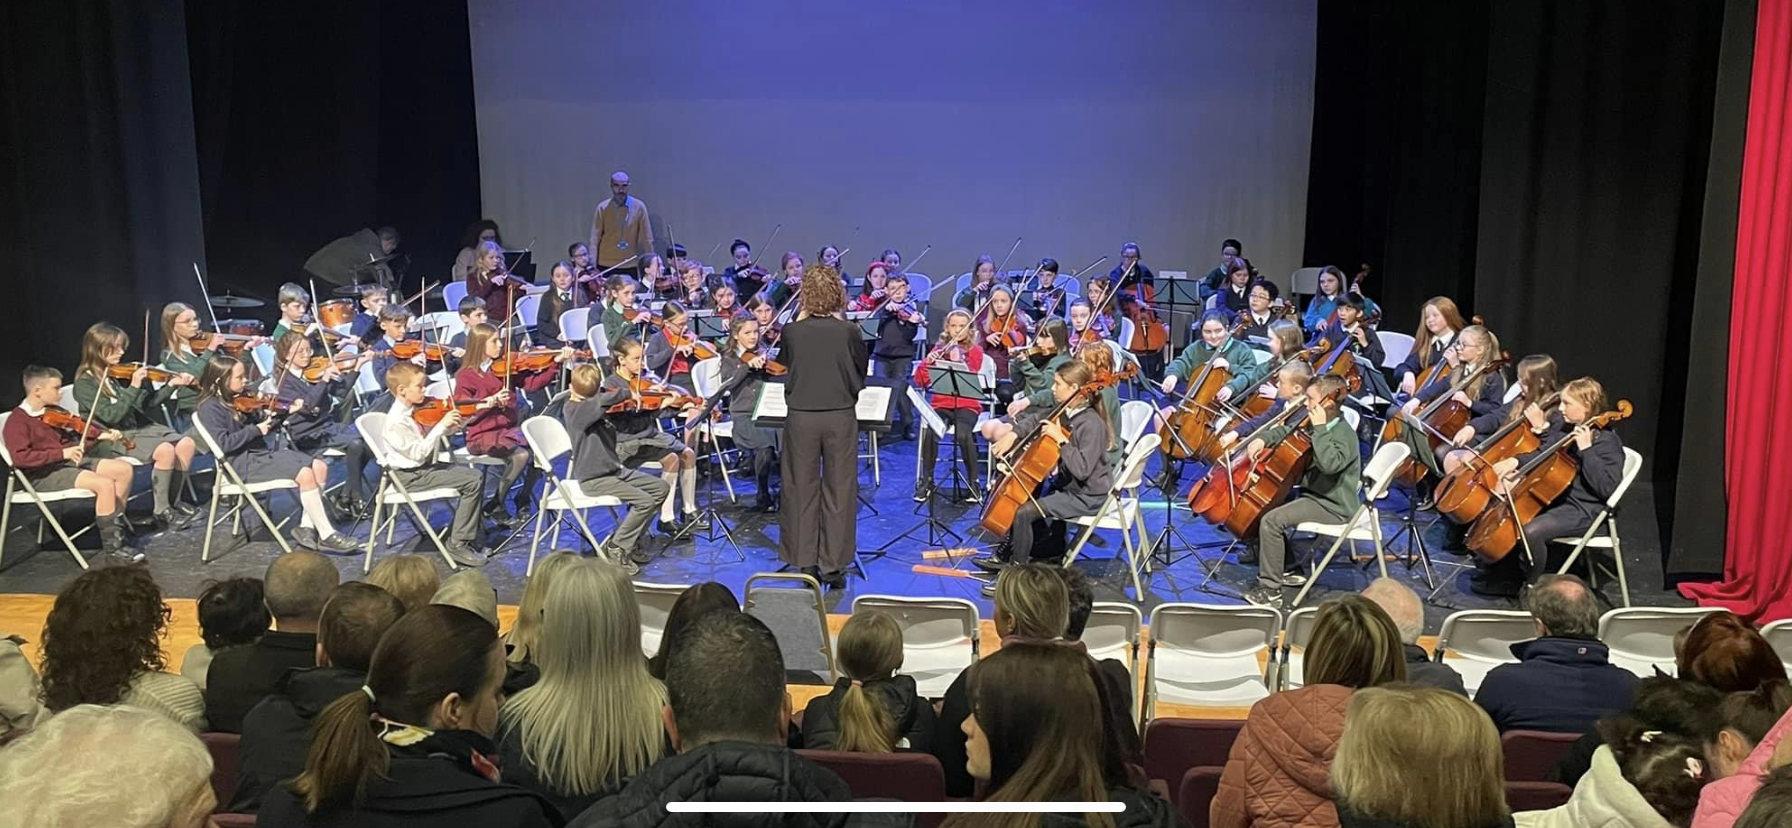 Our girls performed for the EA orchestra last weekend.